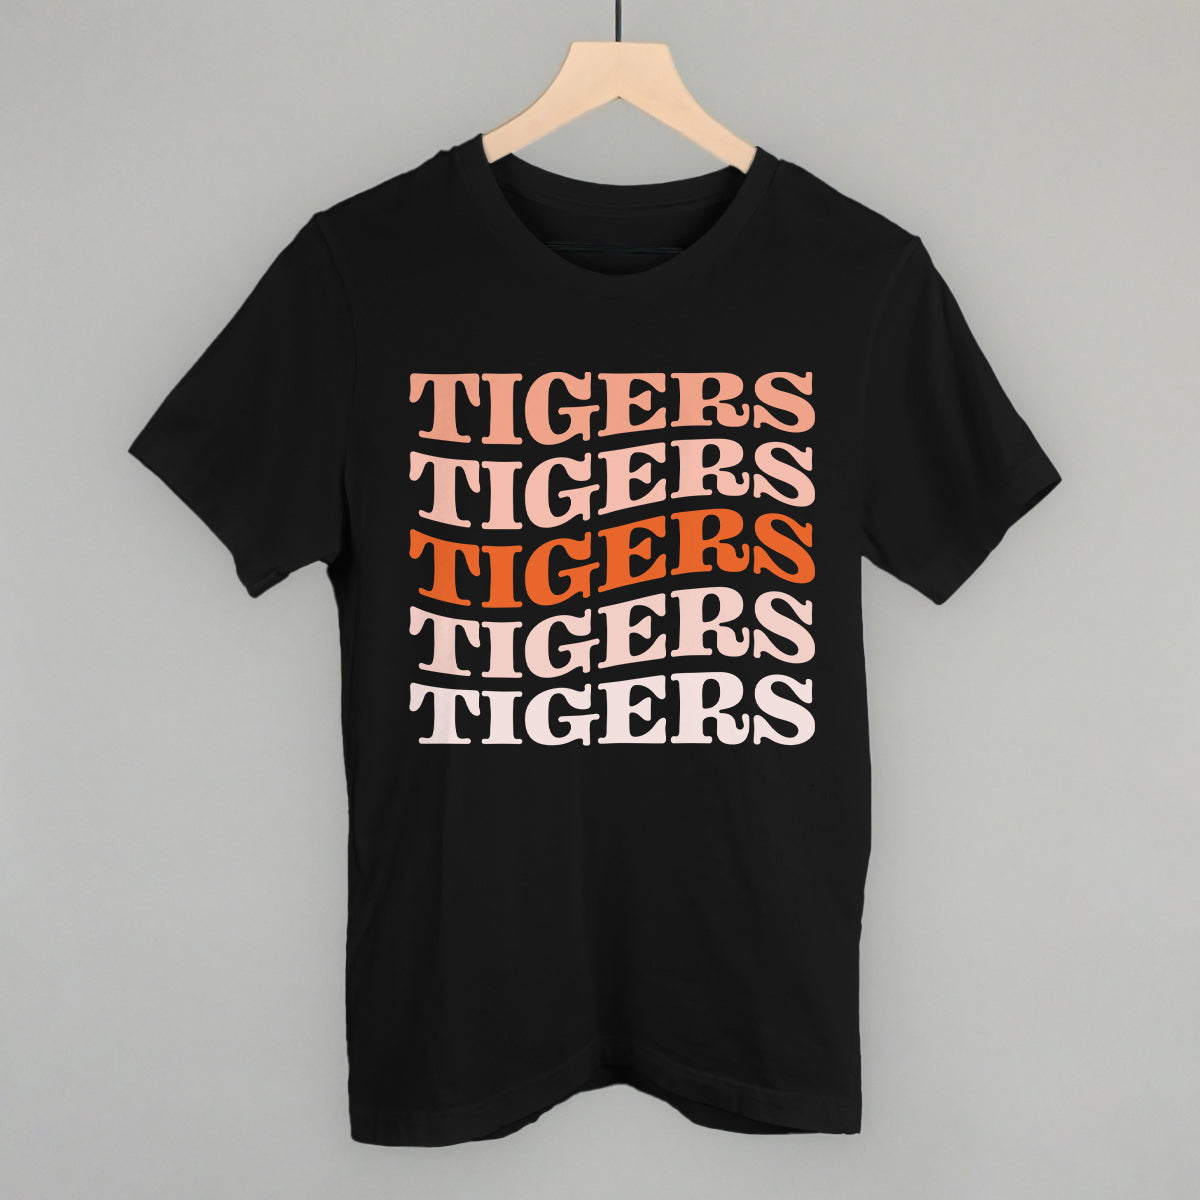 Tigers (Repeated Wave)